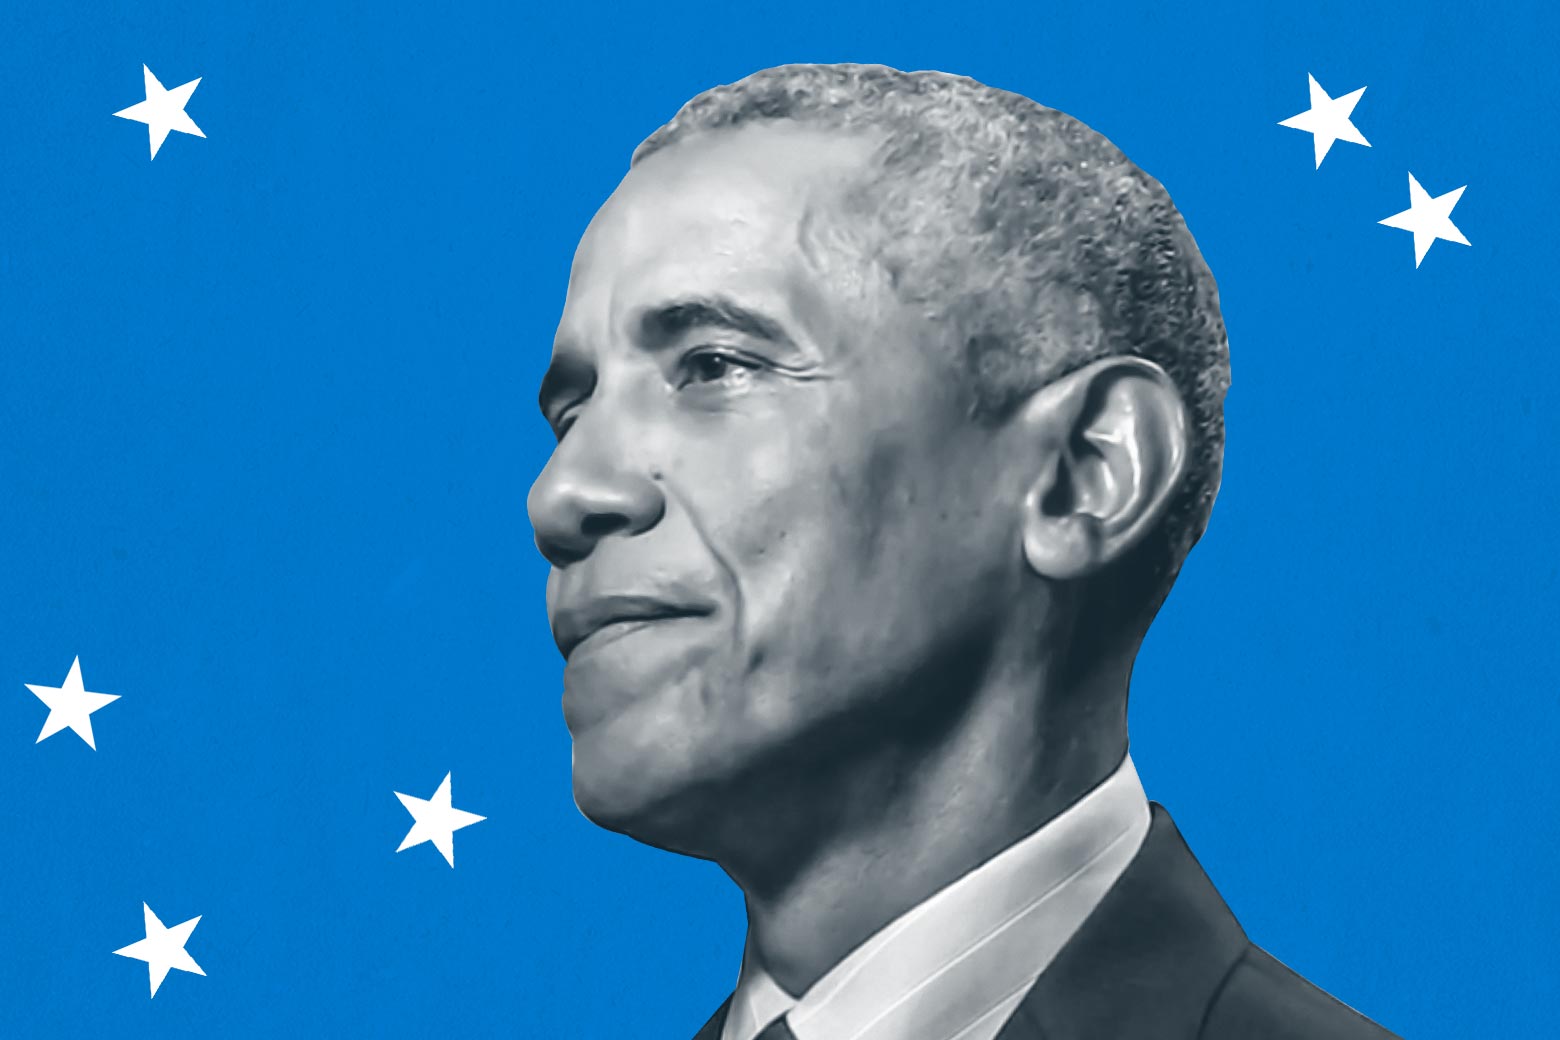 Obama's head is seen against a blue background with stars and a sign reading "2020 Democratic National Convention."